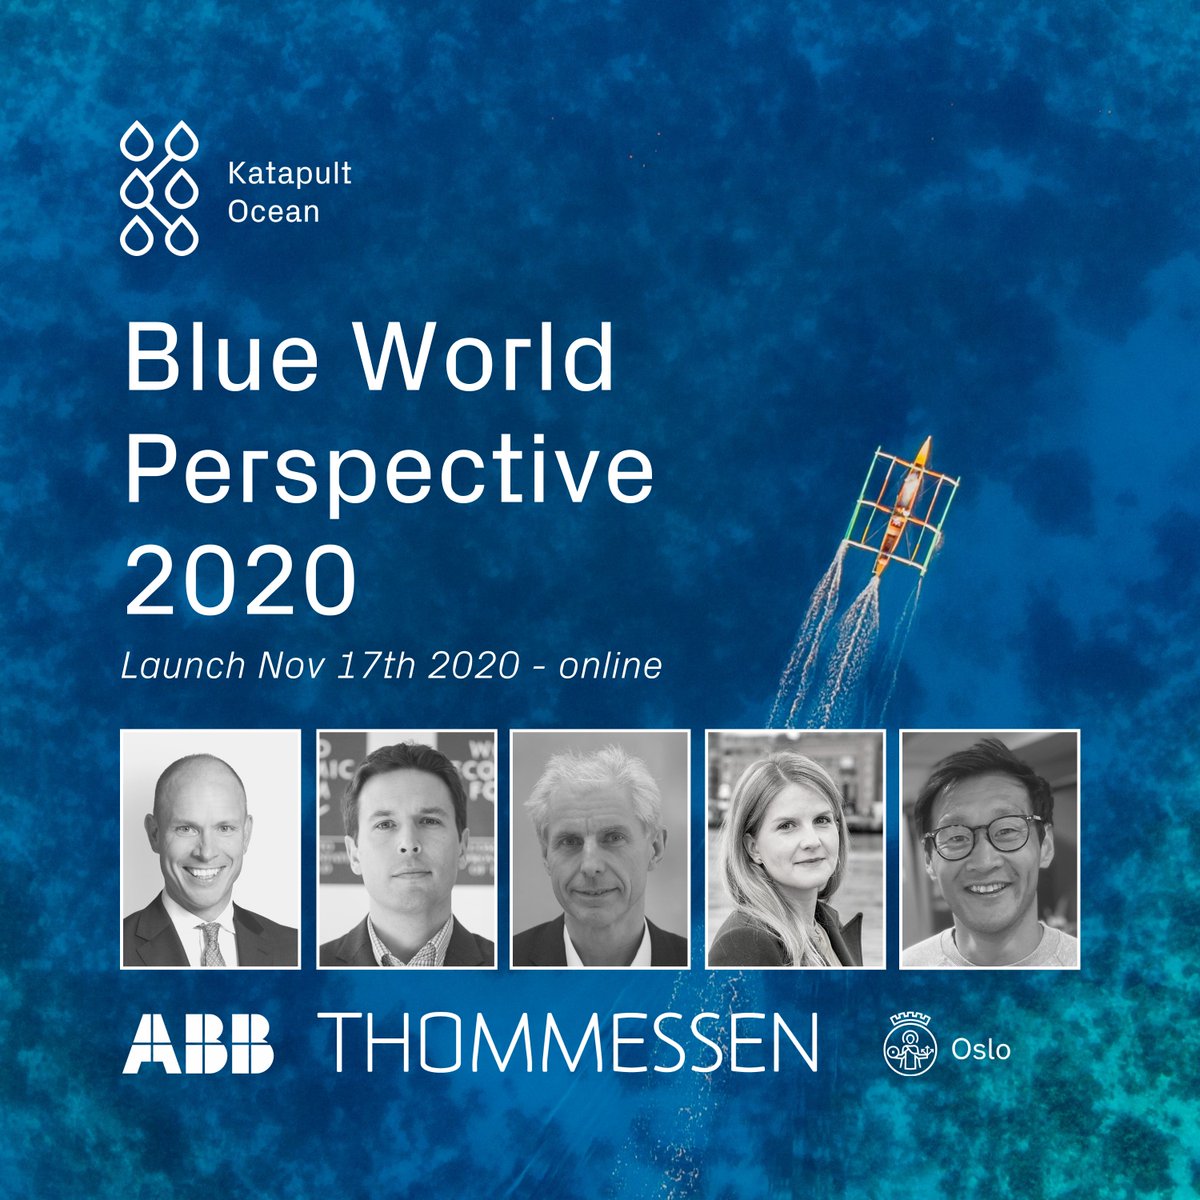 Ready for our annual report the Blue World Perspective 2020? You will get all the latest numbers and findings from the global landscape of impact driven #ocean #startups when we launch this year's report event.webinarjam.com/register/24/7v…